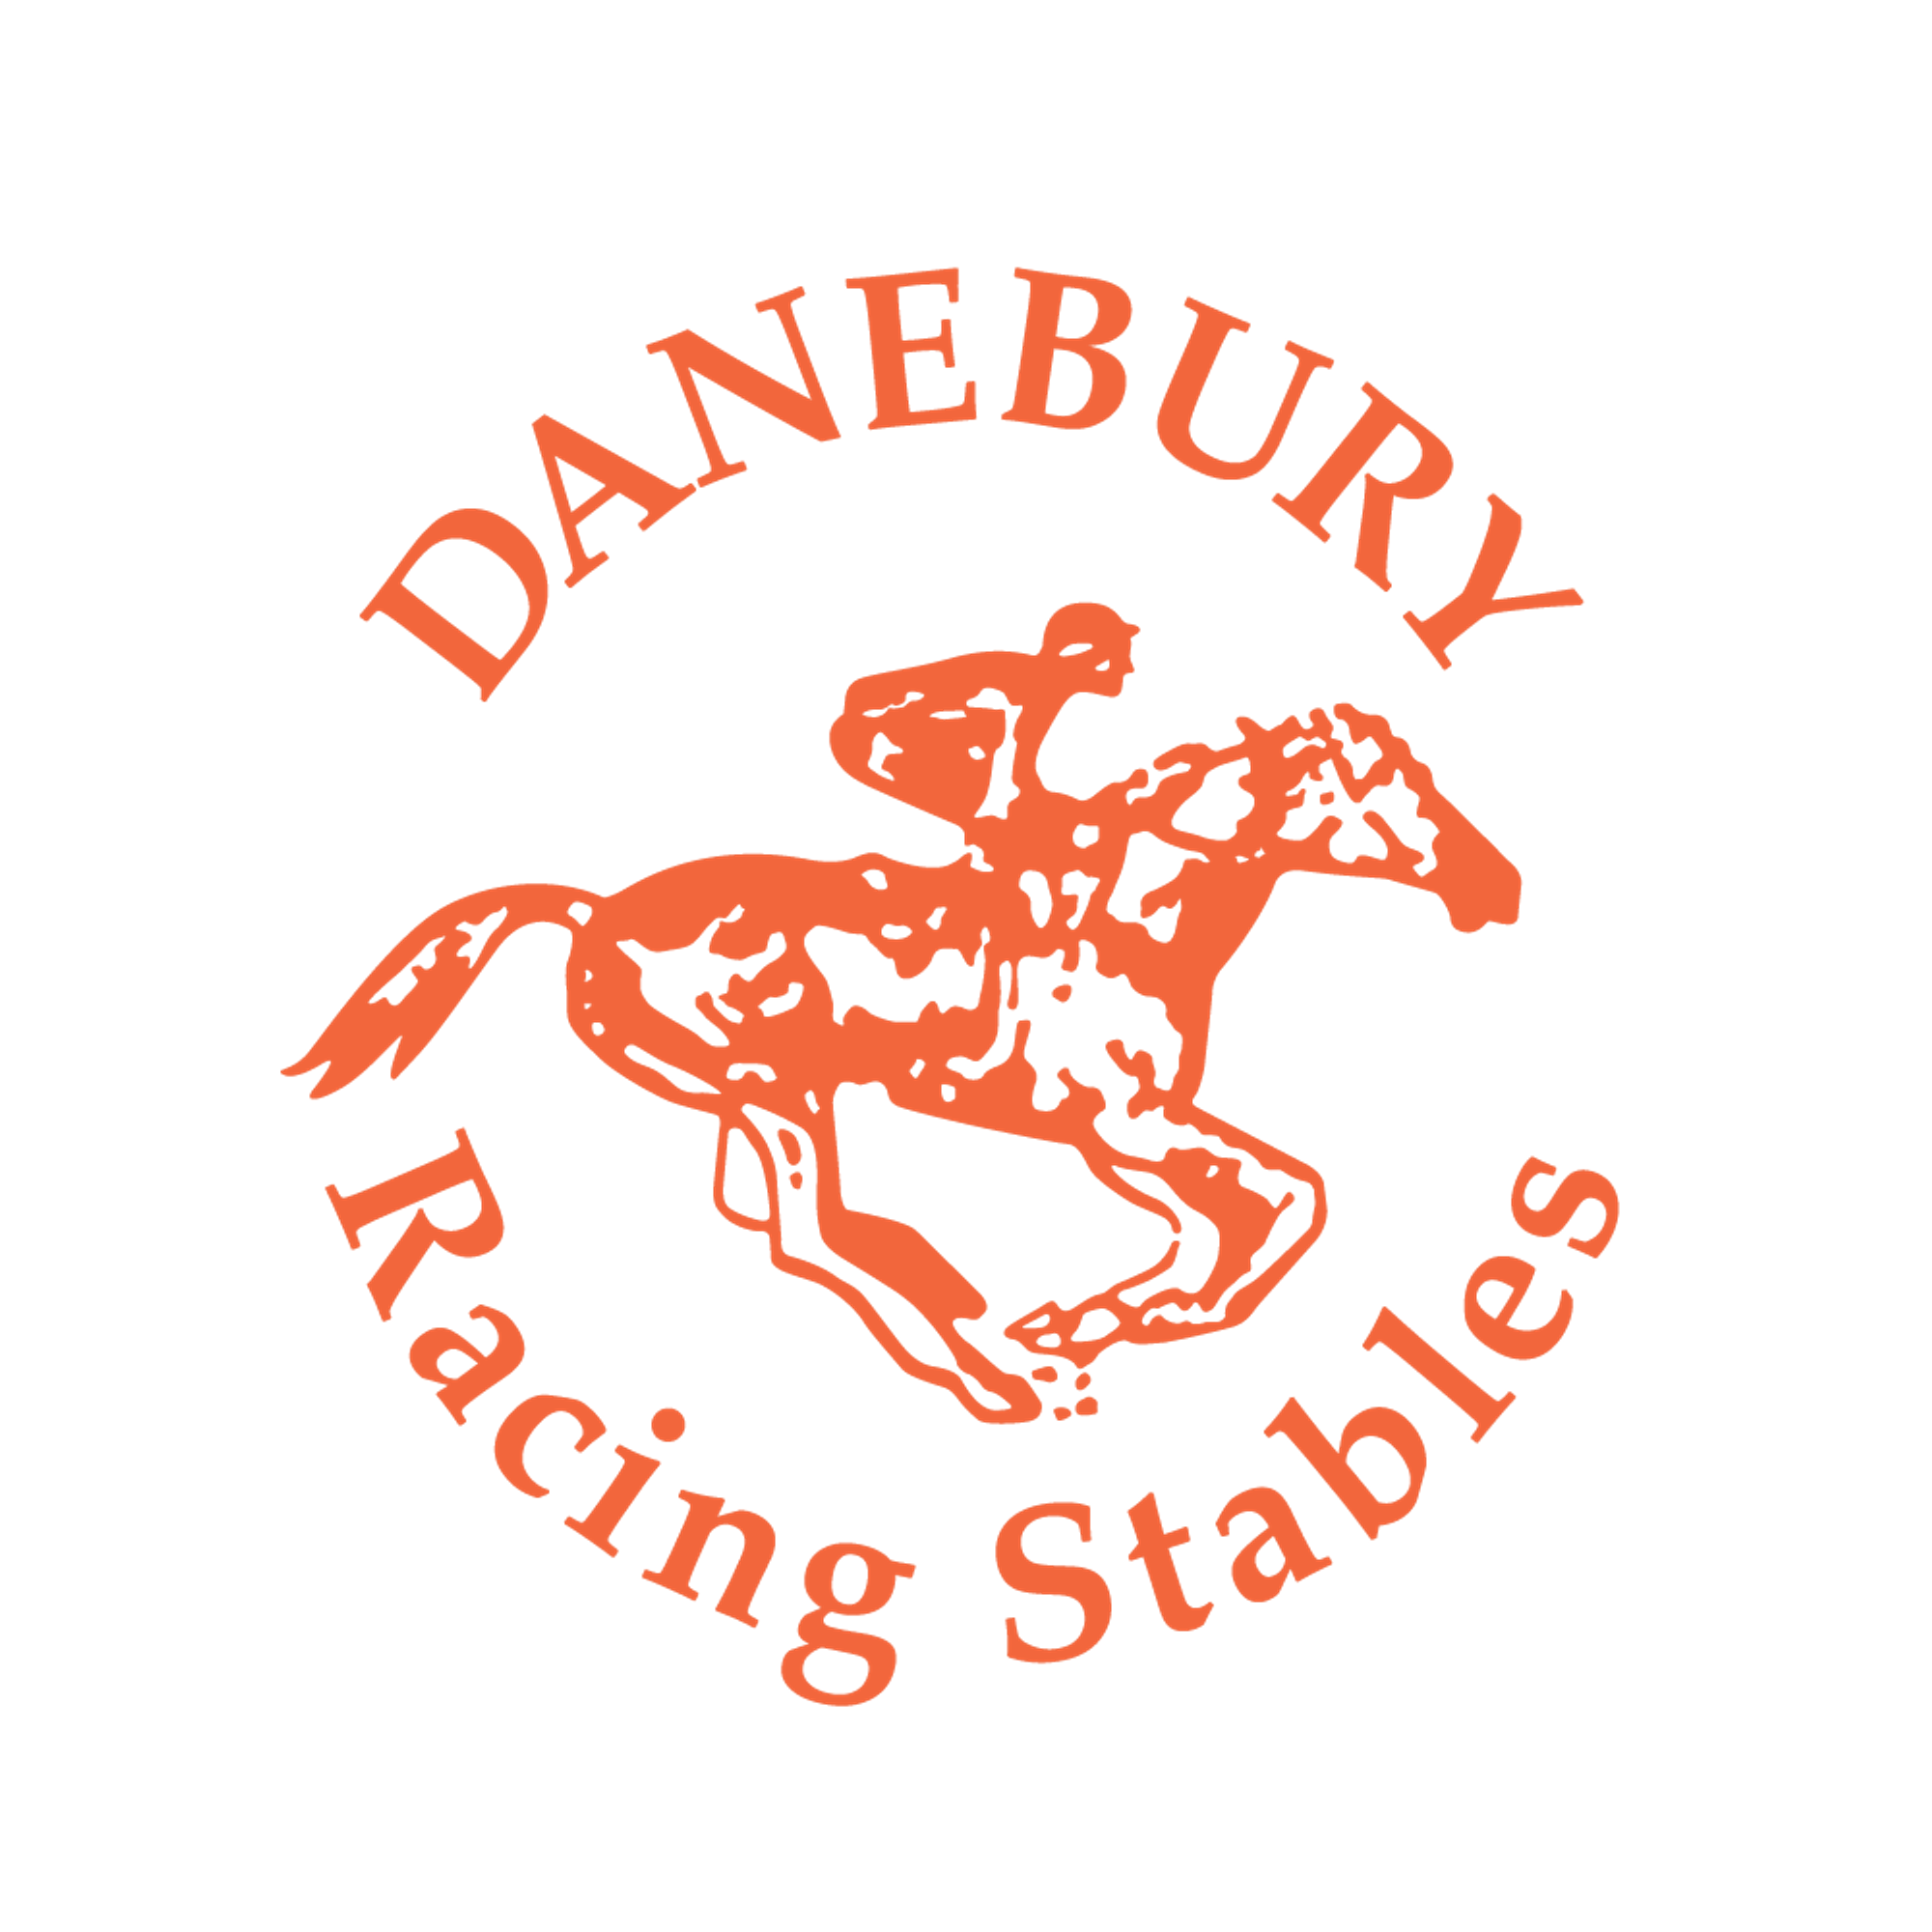 Danebury is one of the countries finest horse racing yards with facilities for 100 horses. Visit danebury.co.uk for more information.